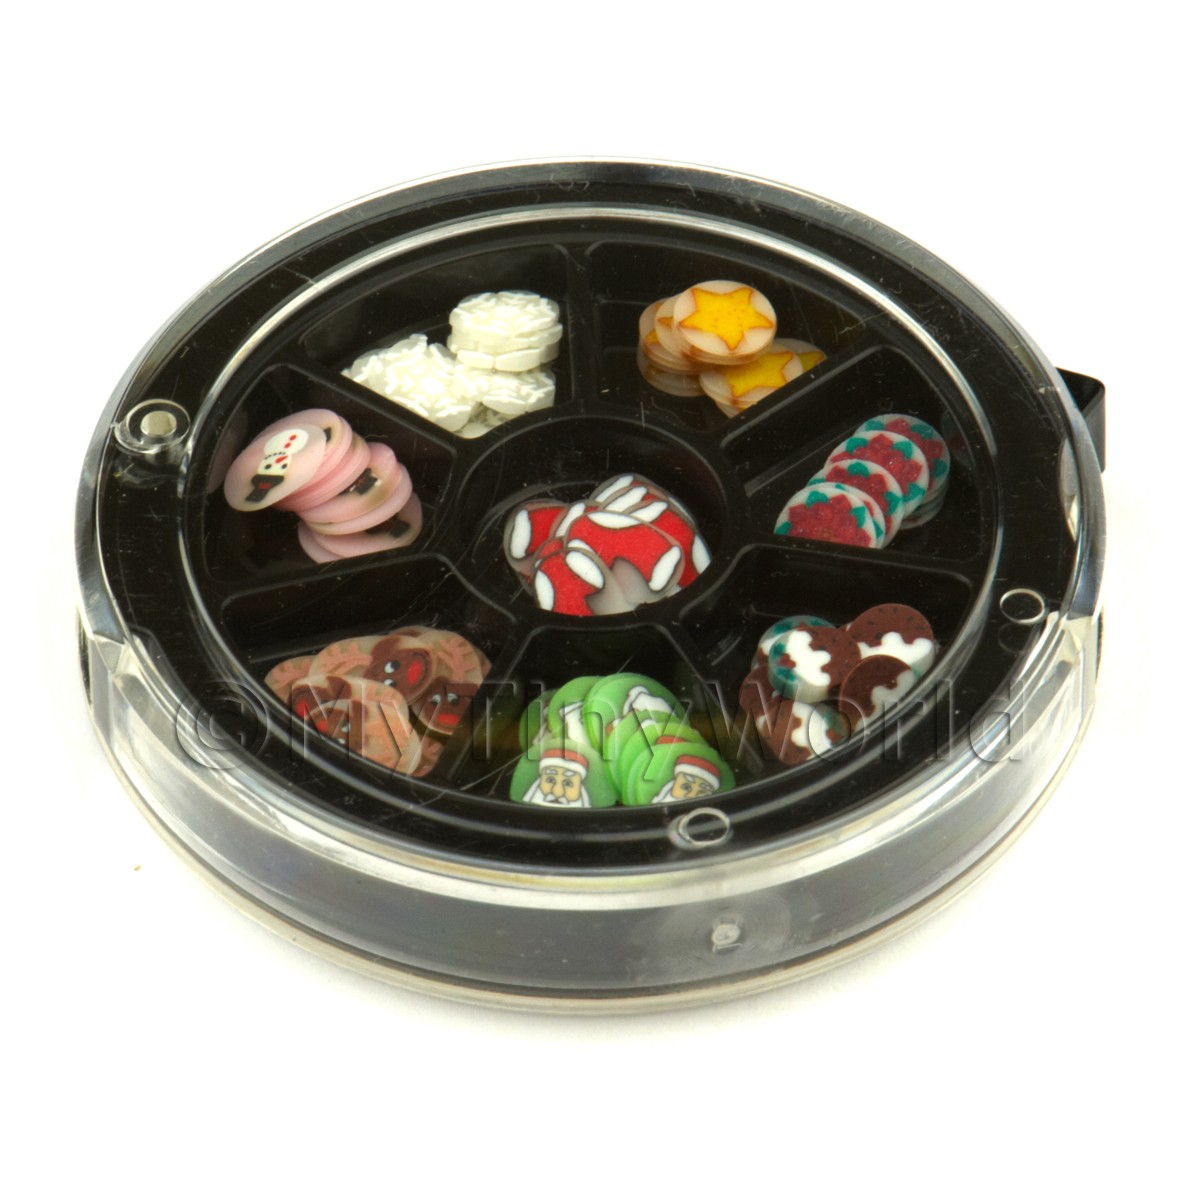 80 Assorted Nail Art Christmas Slices in A Wheel